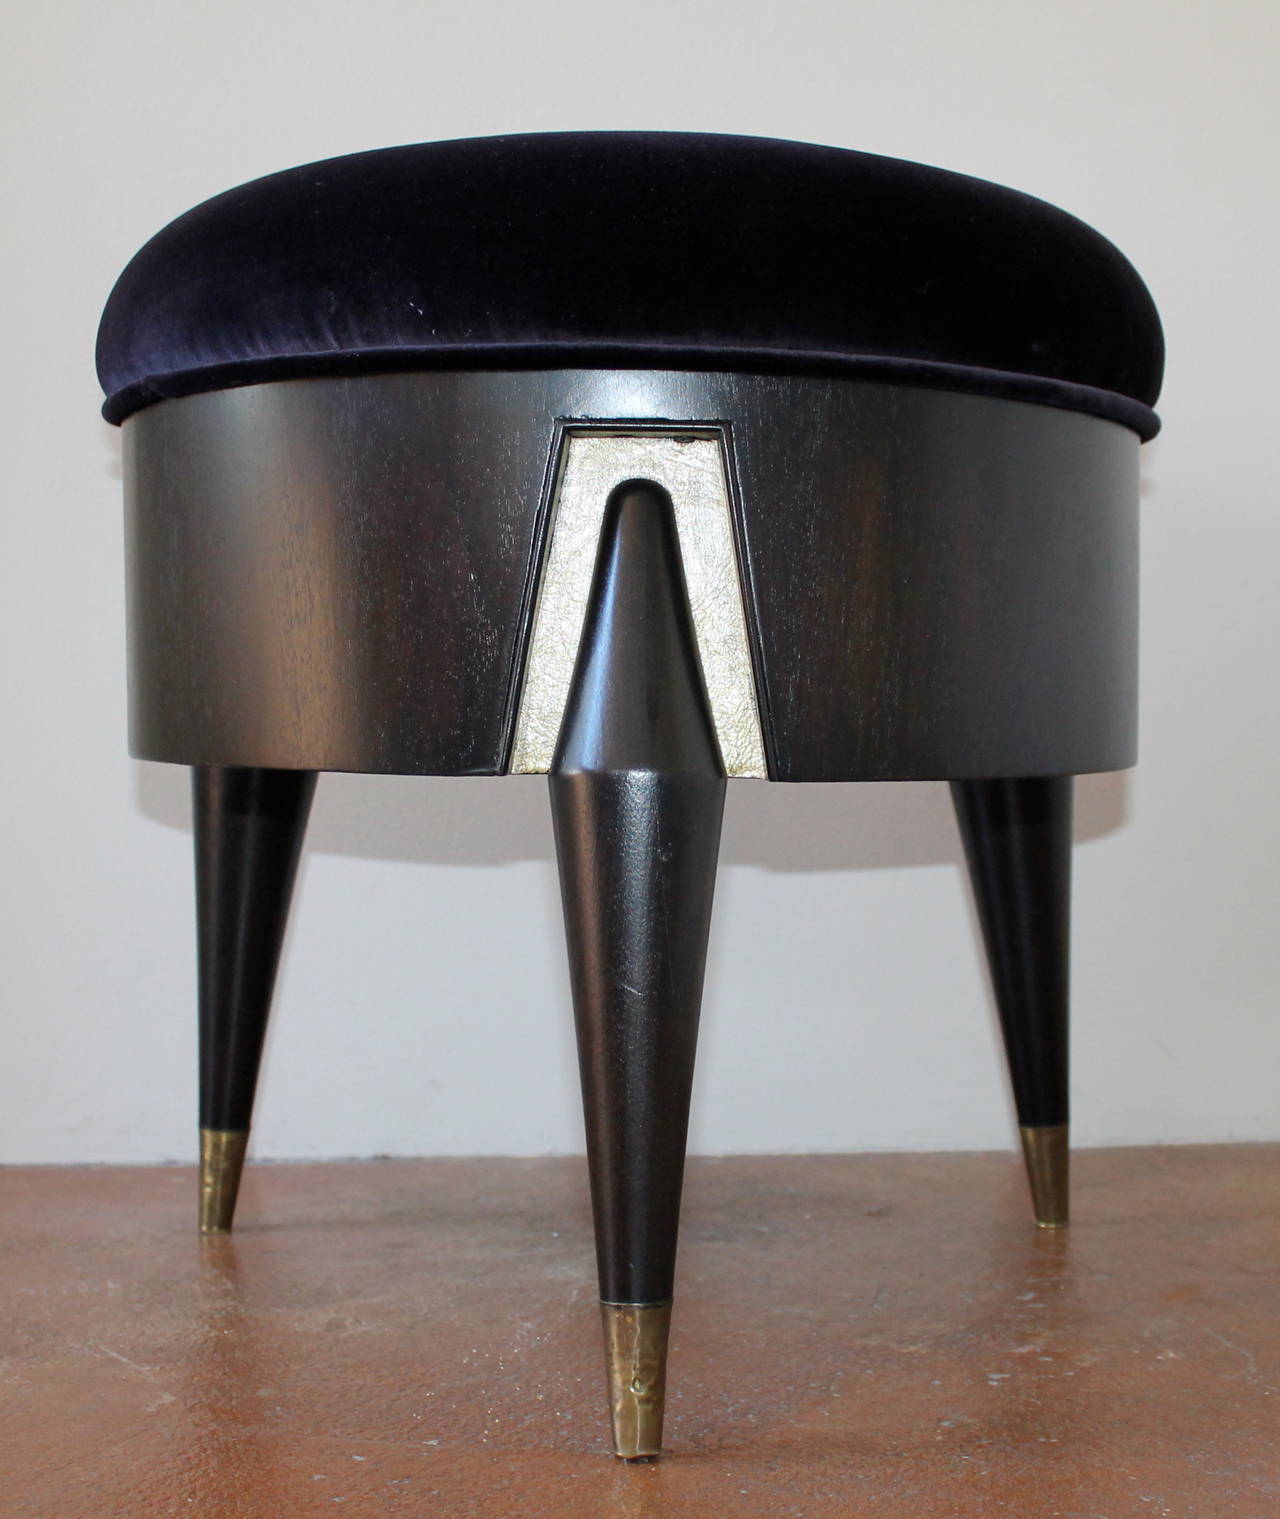 1950s Mexican modern Eugenio Escudero single low velvet stool.
Freshly reupholstered and refinished, original brass casters.